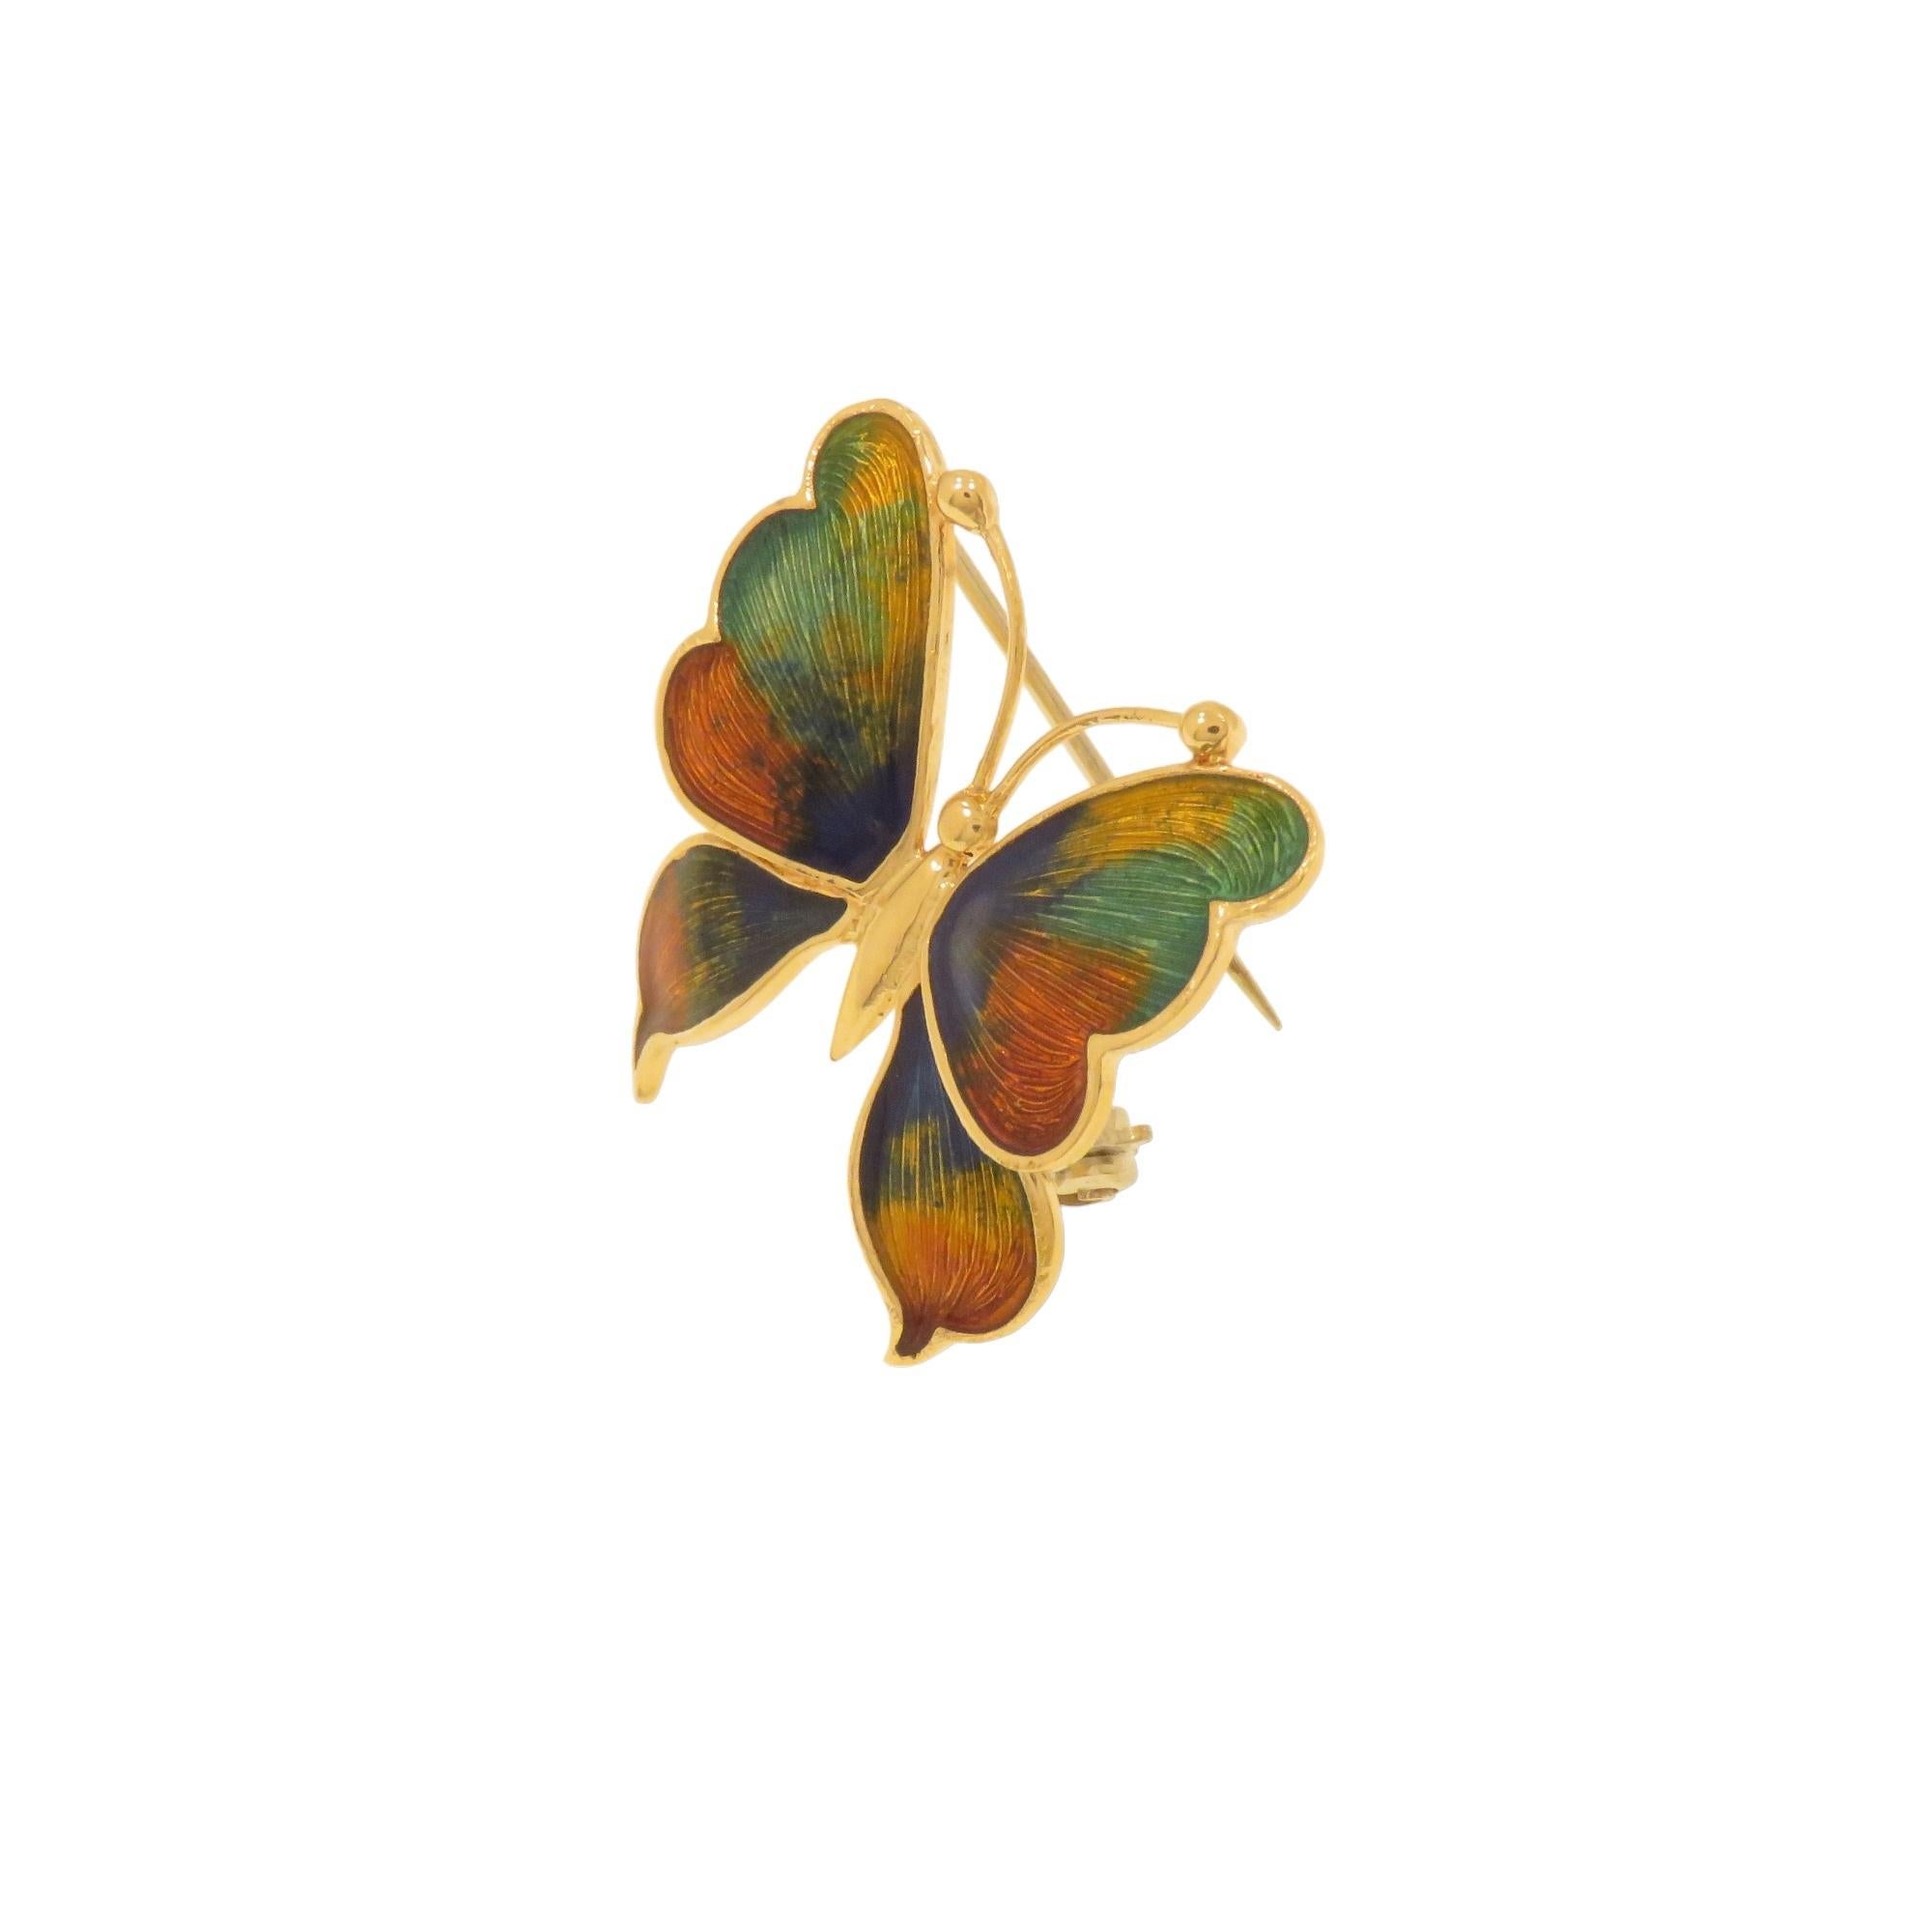 Lovely enamel 18 karat yellow gold butterfly vintage brooch in shades of blue, orange, green and yellow. The size is 27X28mm / 1.062x1.102 inches. The enamel is perfect and the pin is straight fastening with a safety clasp. Marked with the Italian